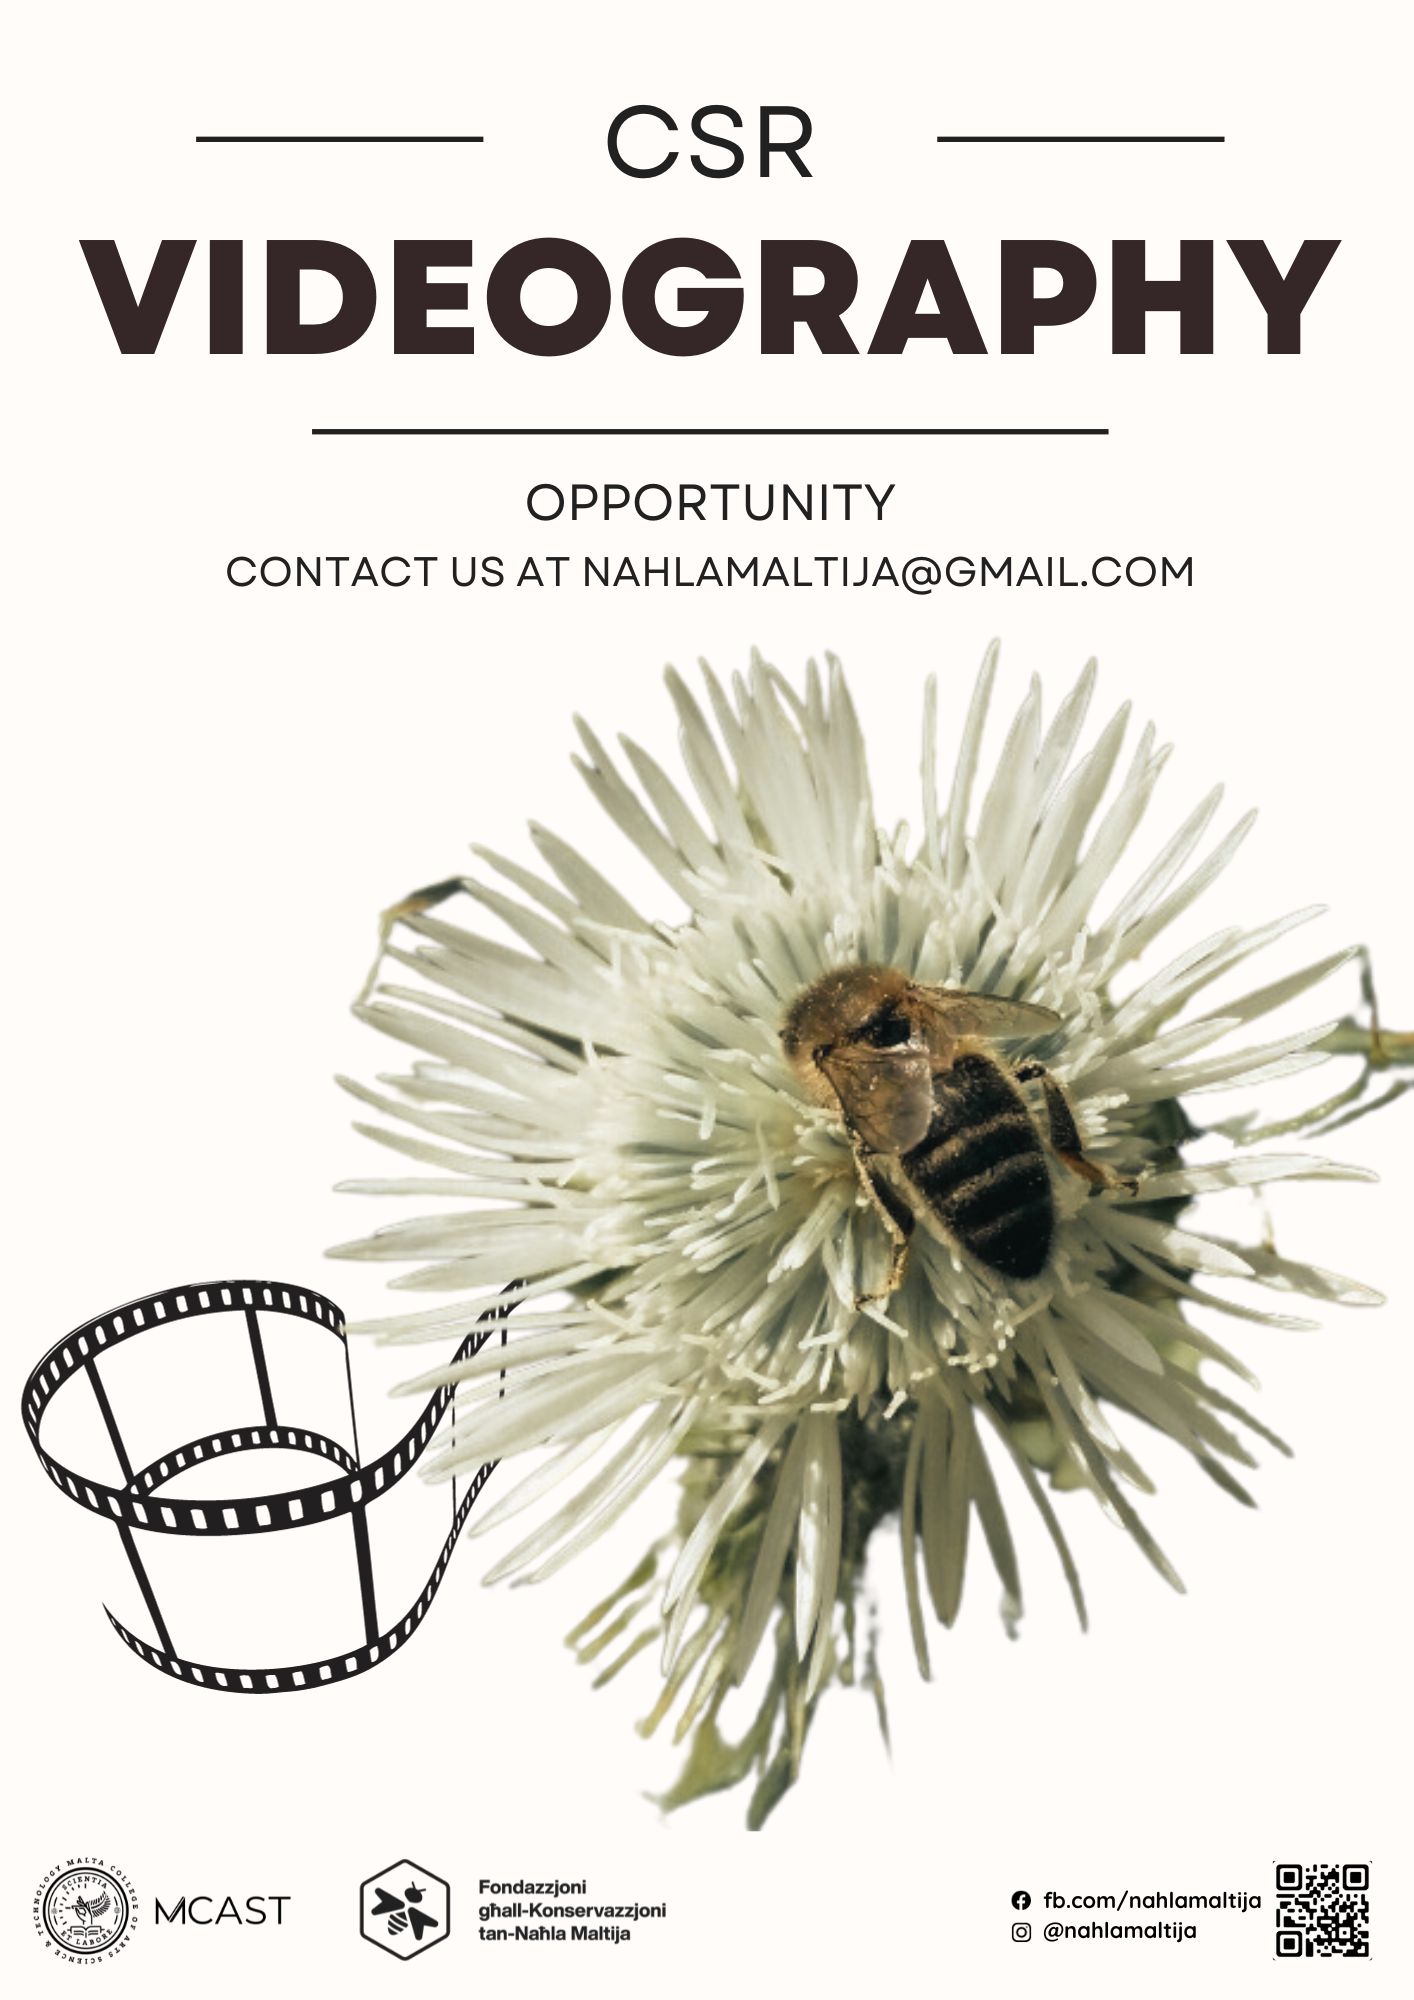 KNM CSR Opportunity - Videography